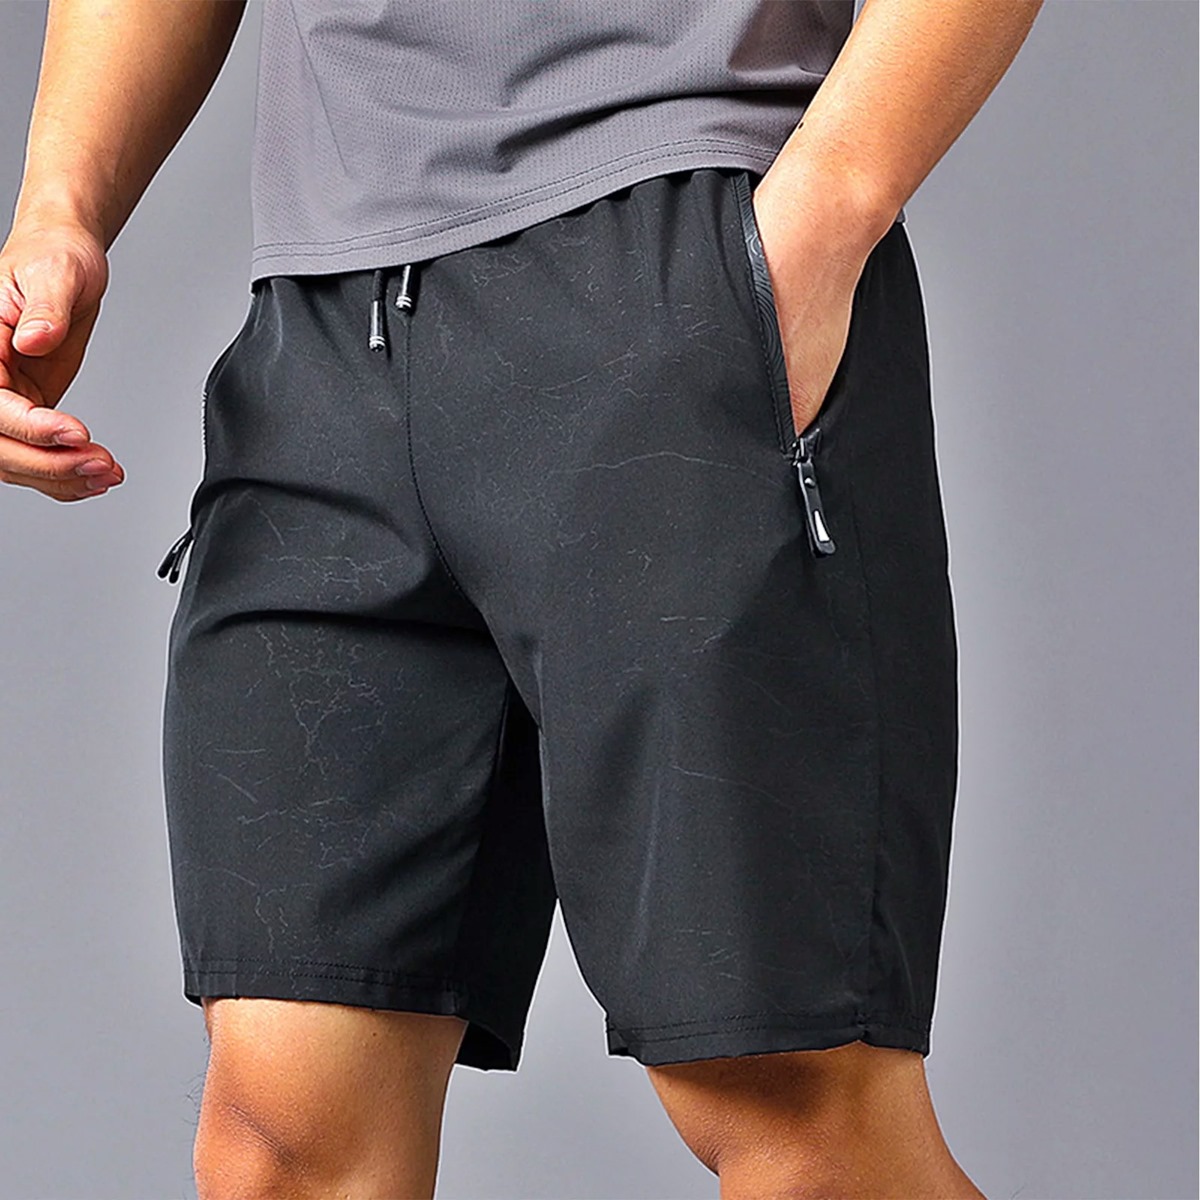 12 Amazing 7-Inch Inseam Athletic Shorts For 2023